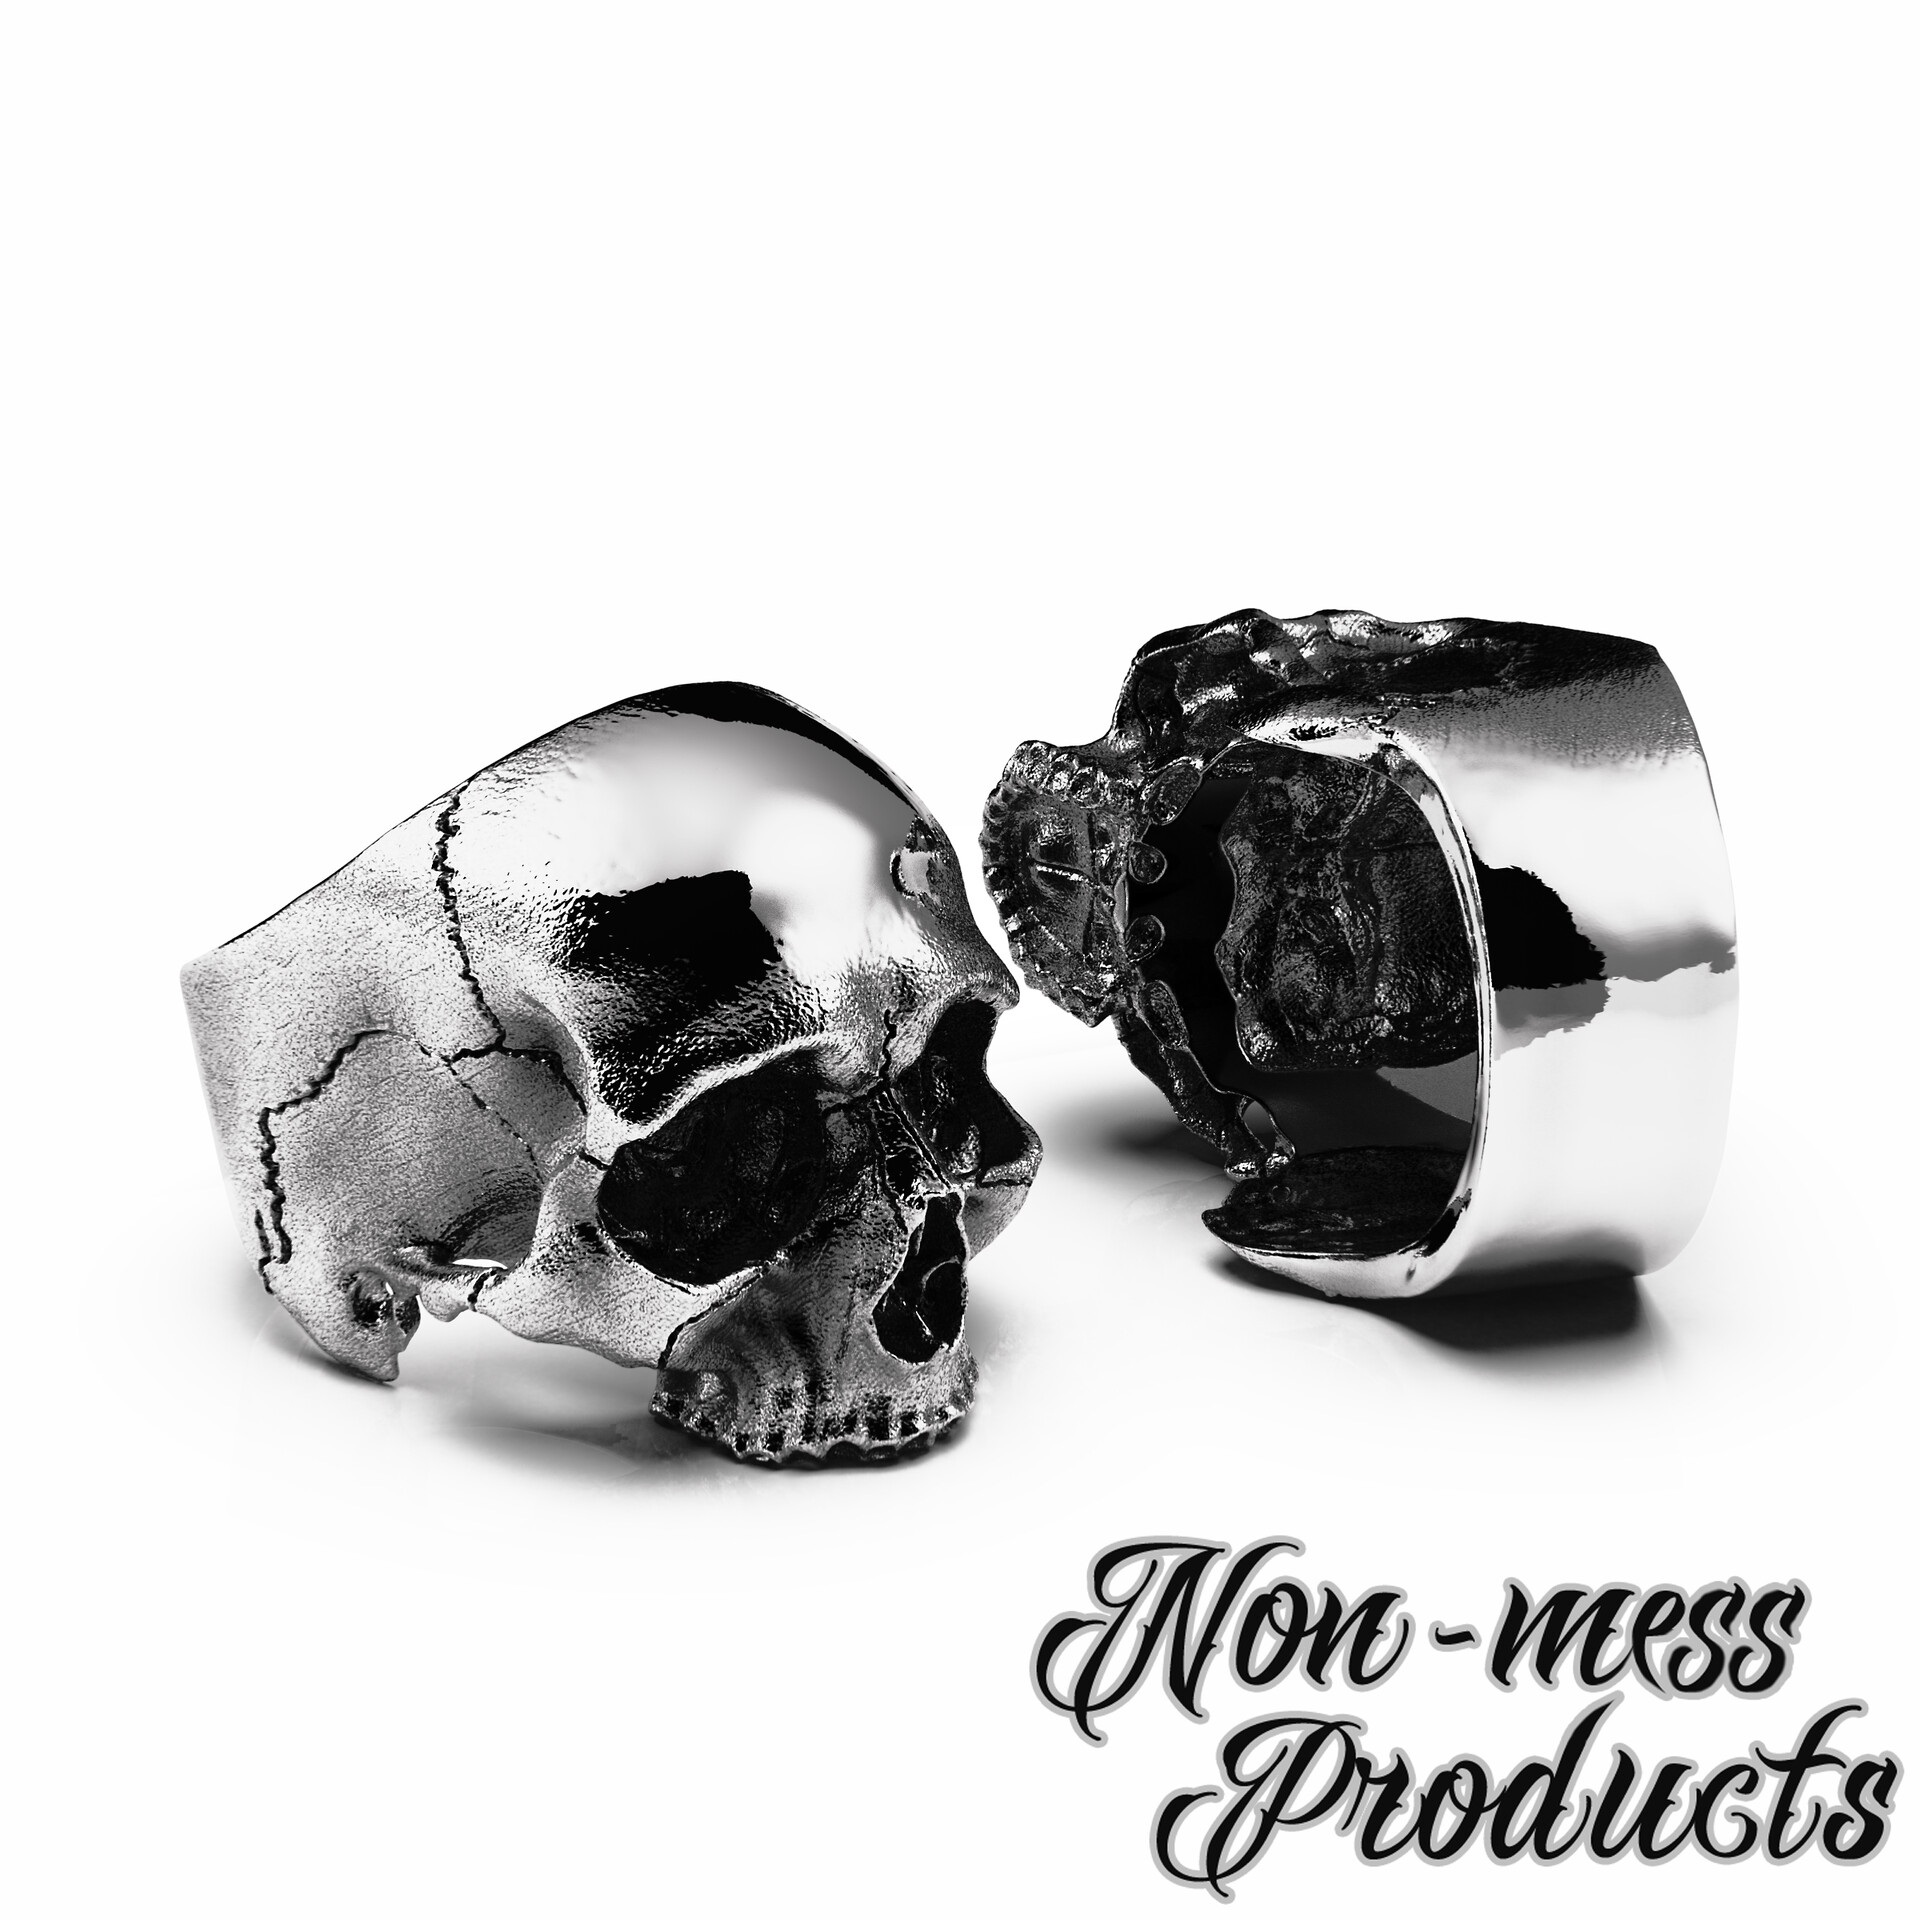 nonmessproducts - Toothless Skull Ring